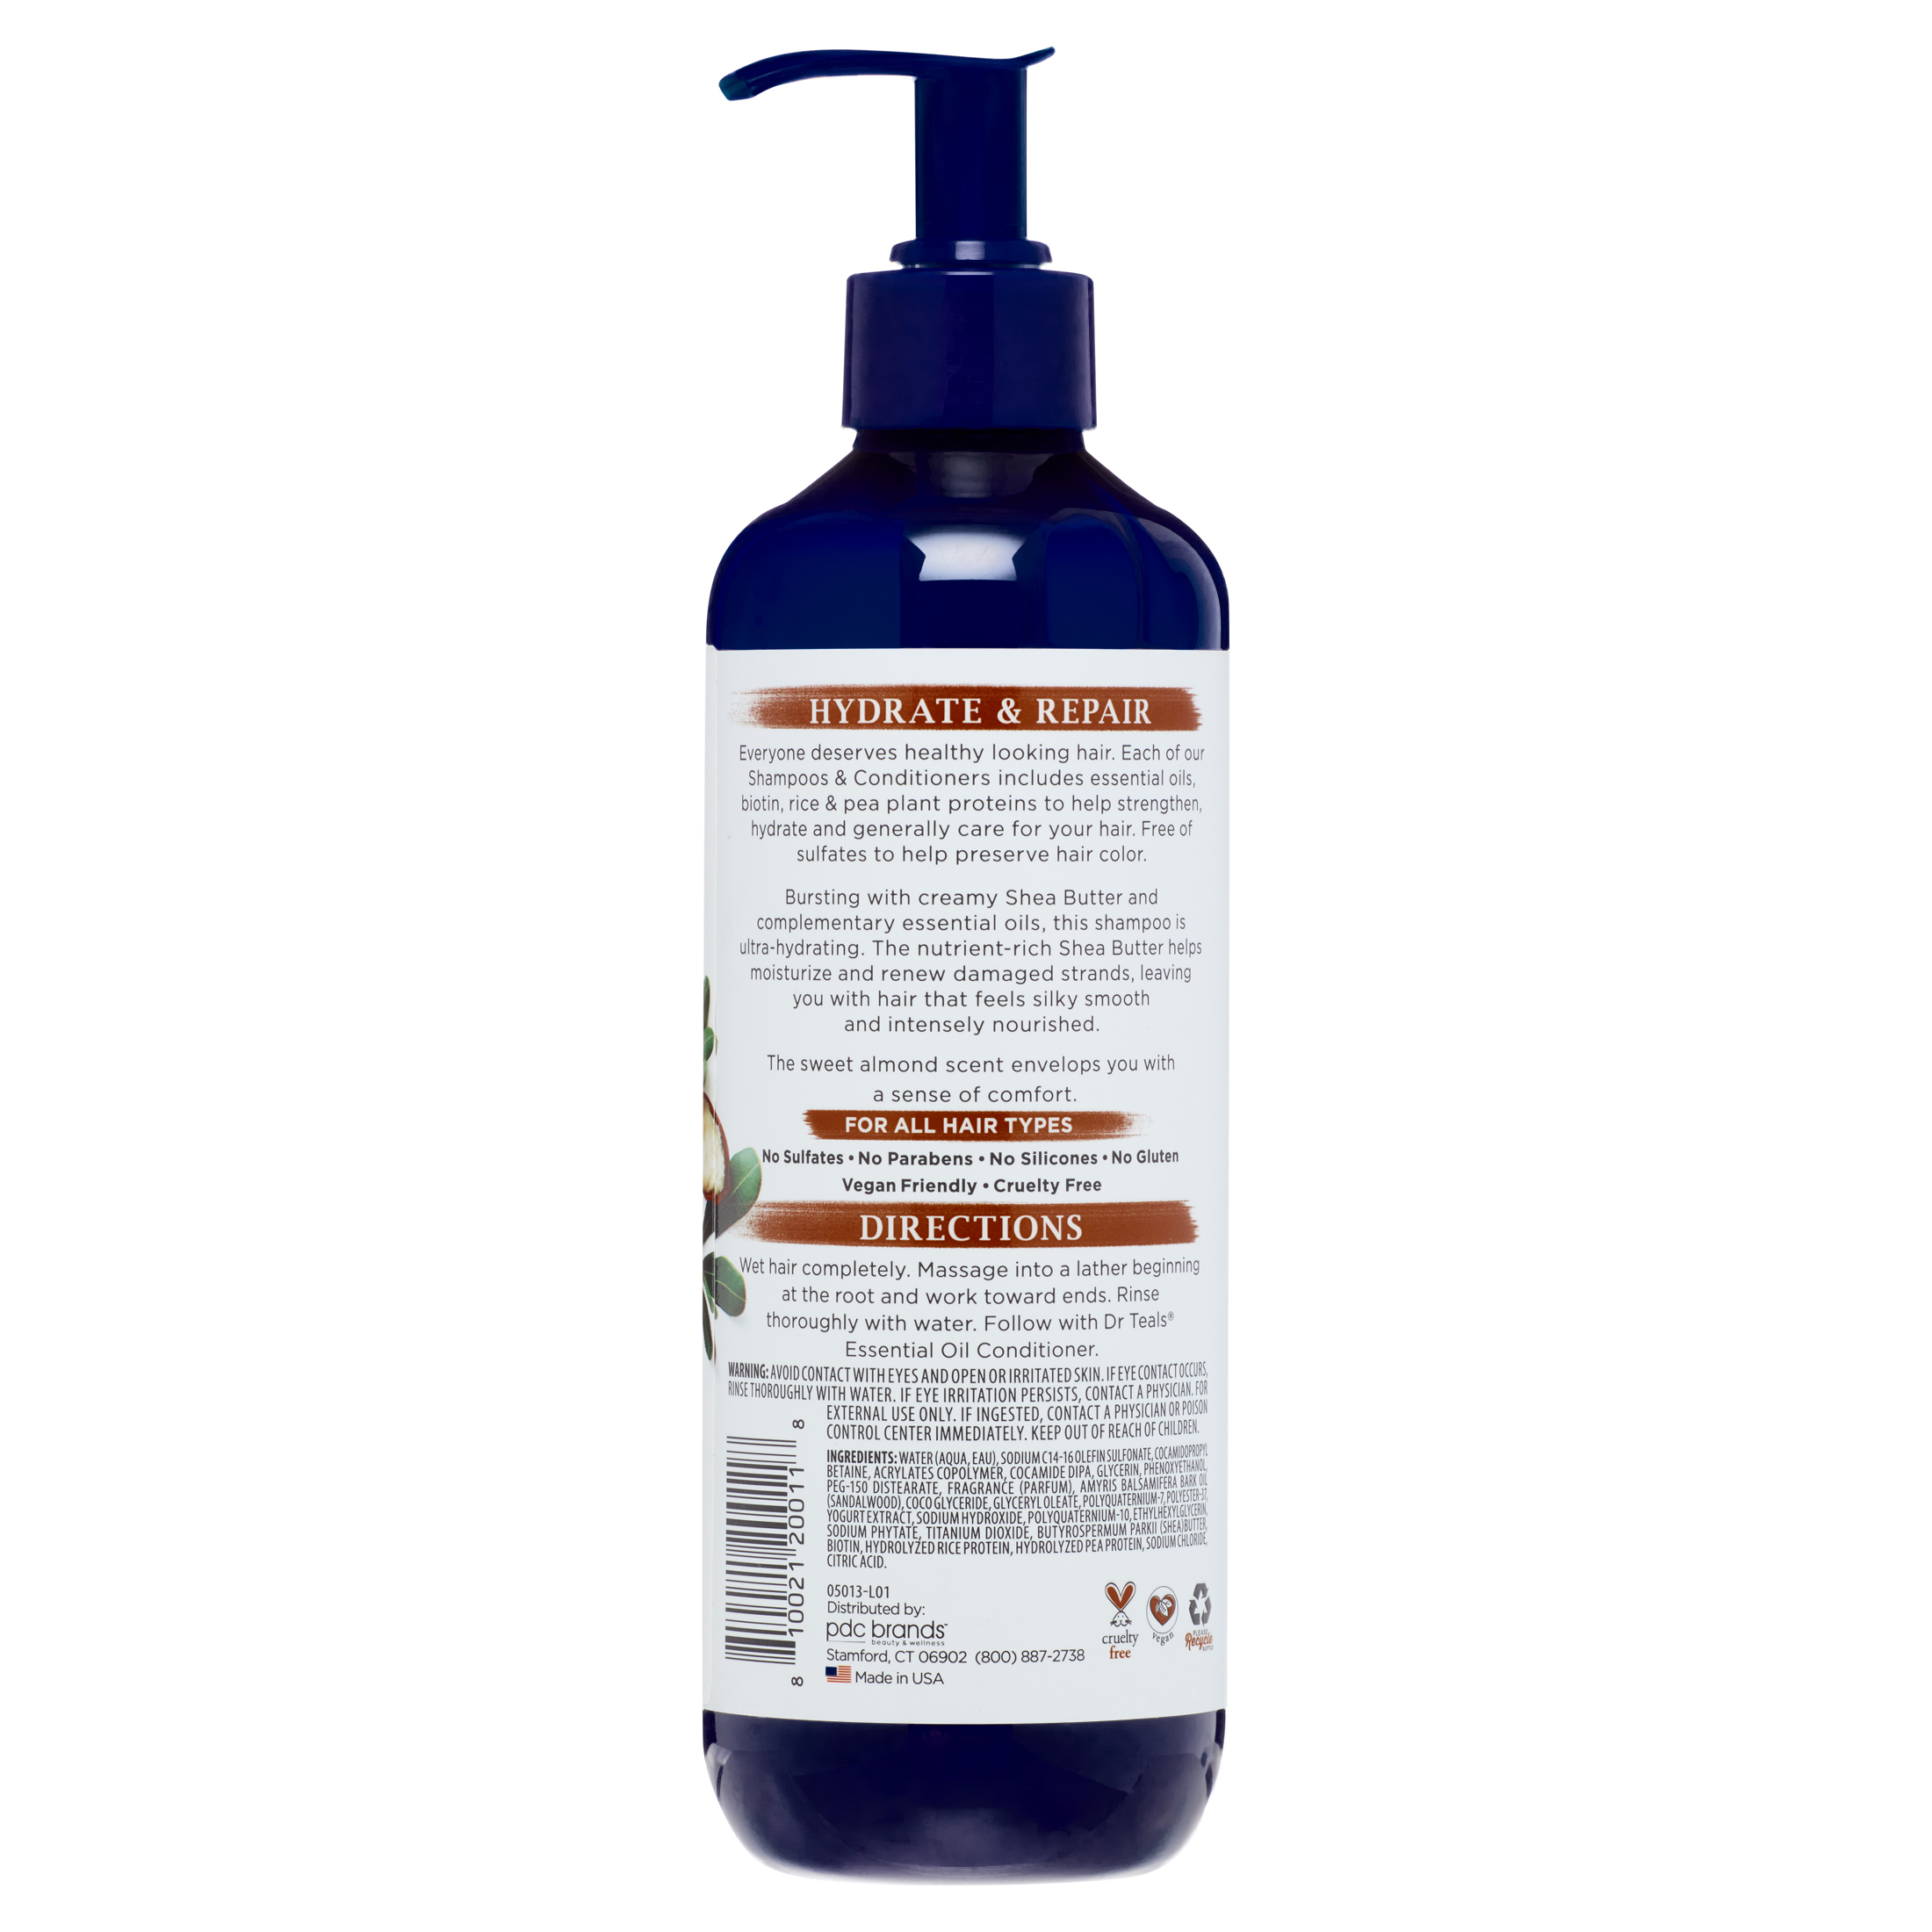 Dr Teal's Shea Butter Hydrate & Repair Essential Oil Shampoo, Sulfate Free, 16 oz. - image 5 of 7